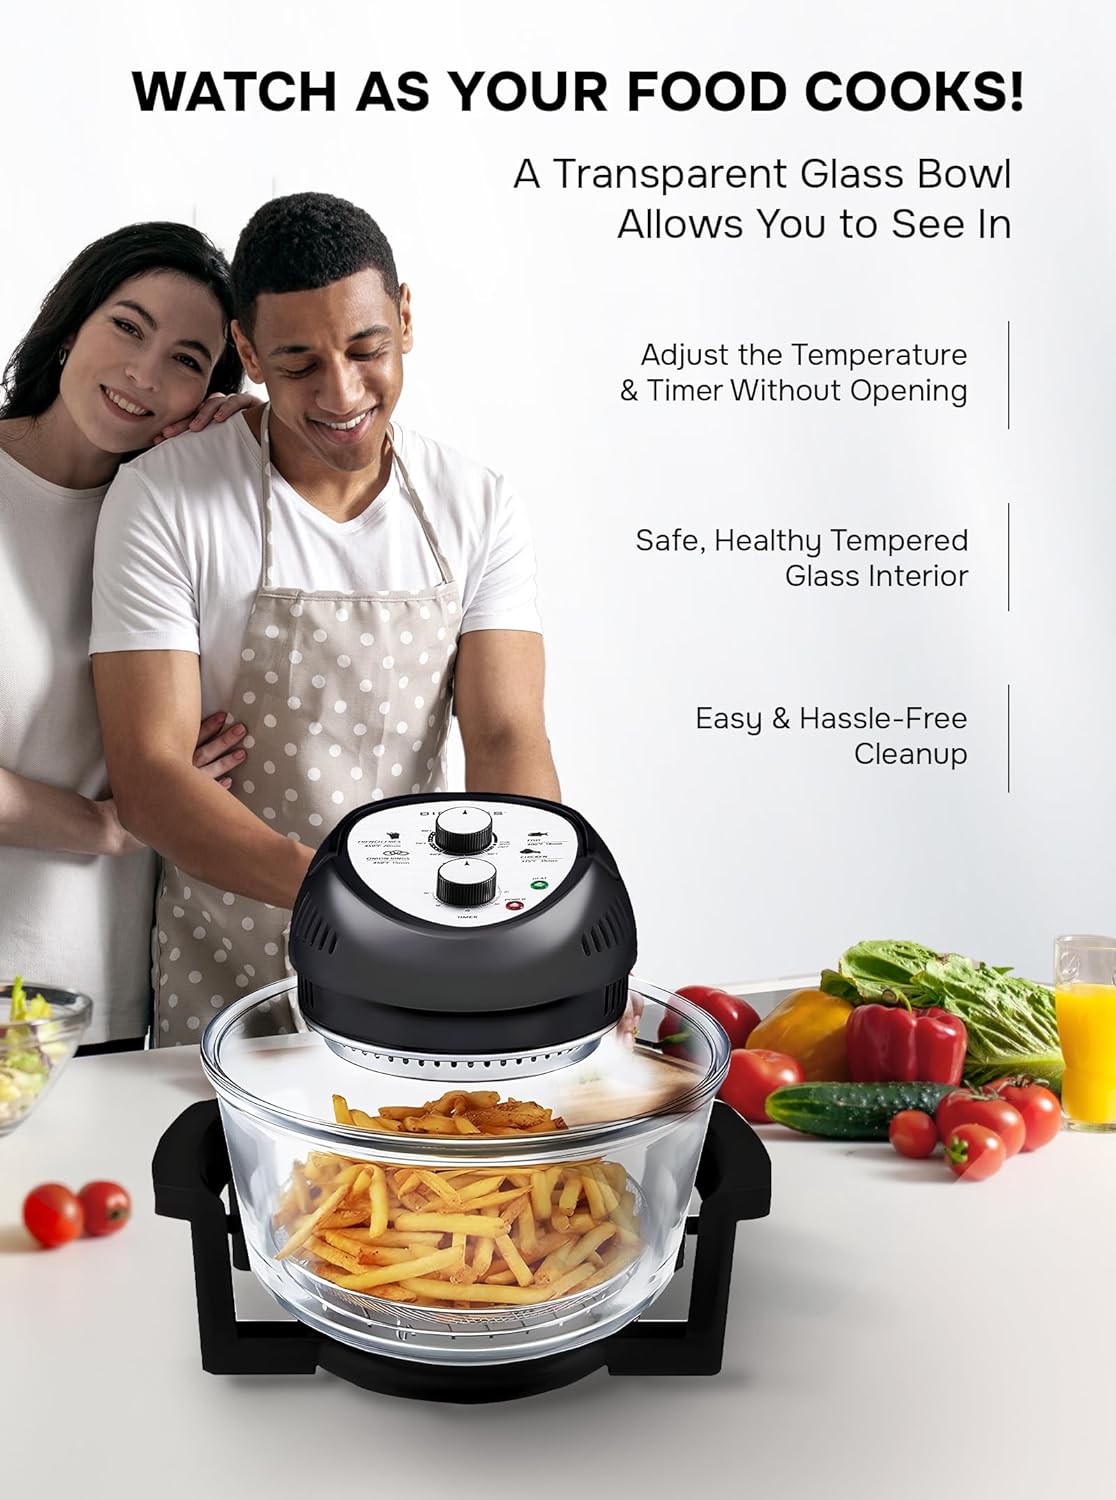 Big Boss 16Qt Large Air Fryer Oven with 50+ Recipe Book AirFryer Oven Makes Healthier Crispy Foods Black - image 5 of 8